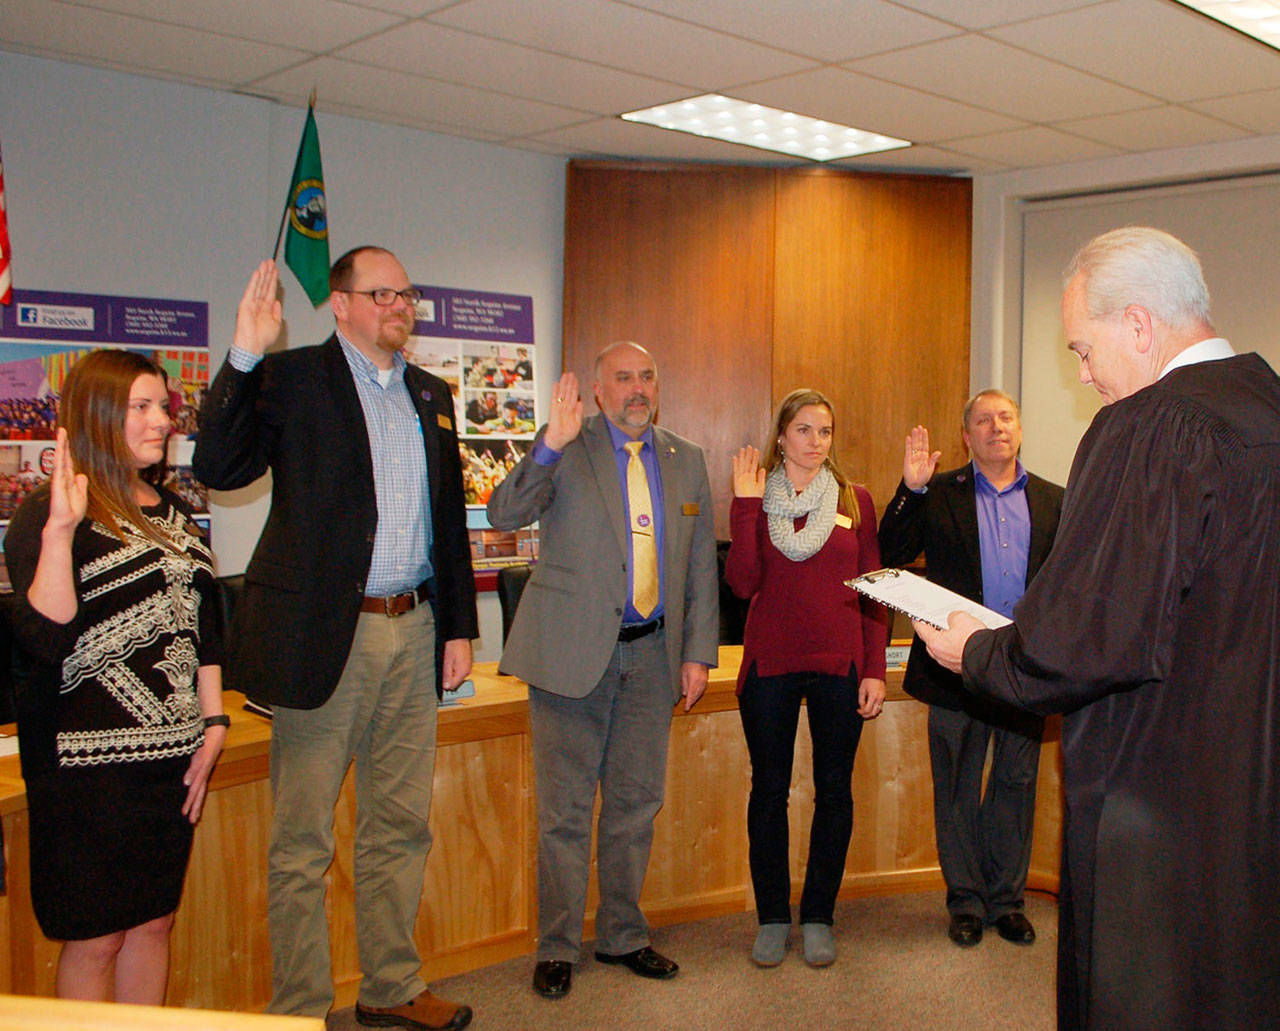 Clallam County Superior Court Judge Erik Rohrer performs an oath of office to Sequim School Board members at the Monday board meeting. From left: Heather Short, Brian Kuh, Jim Stoffer, Robin Henrikson and Brandino Gibson. (Erin Hawkins/Olympic Peninsula News Group)